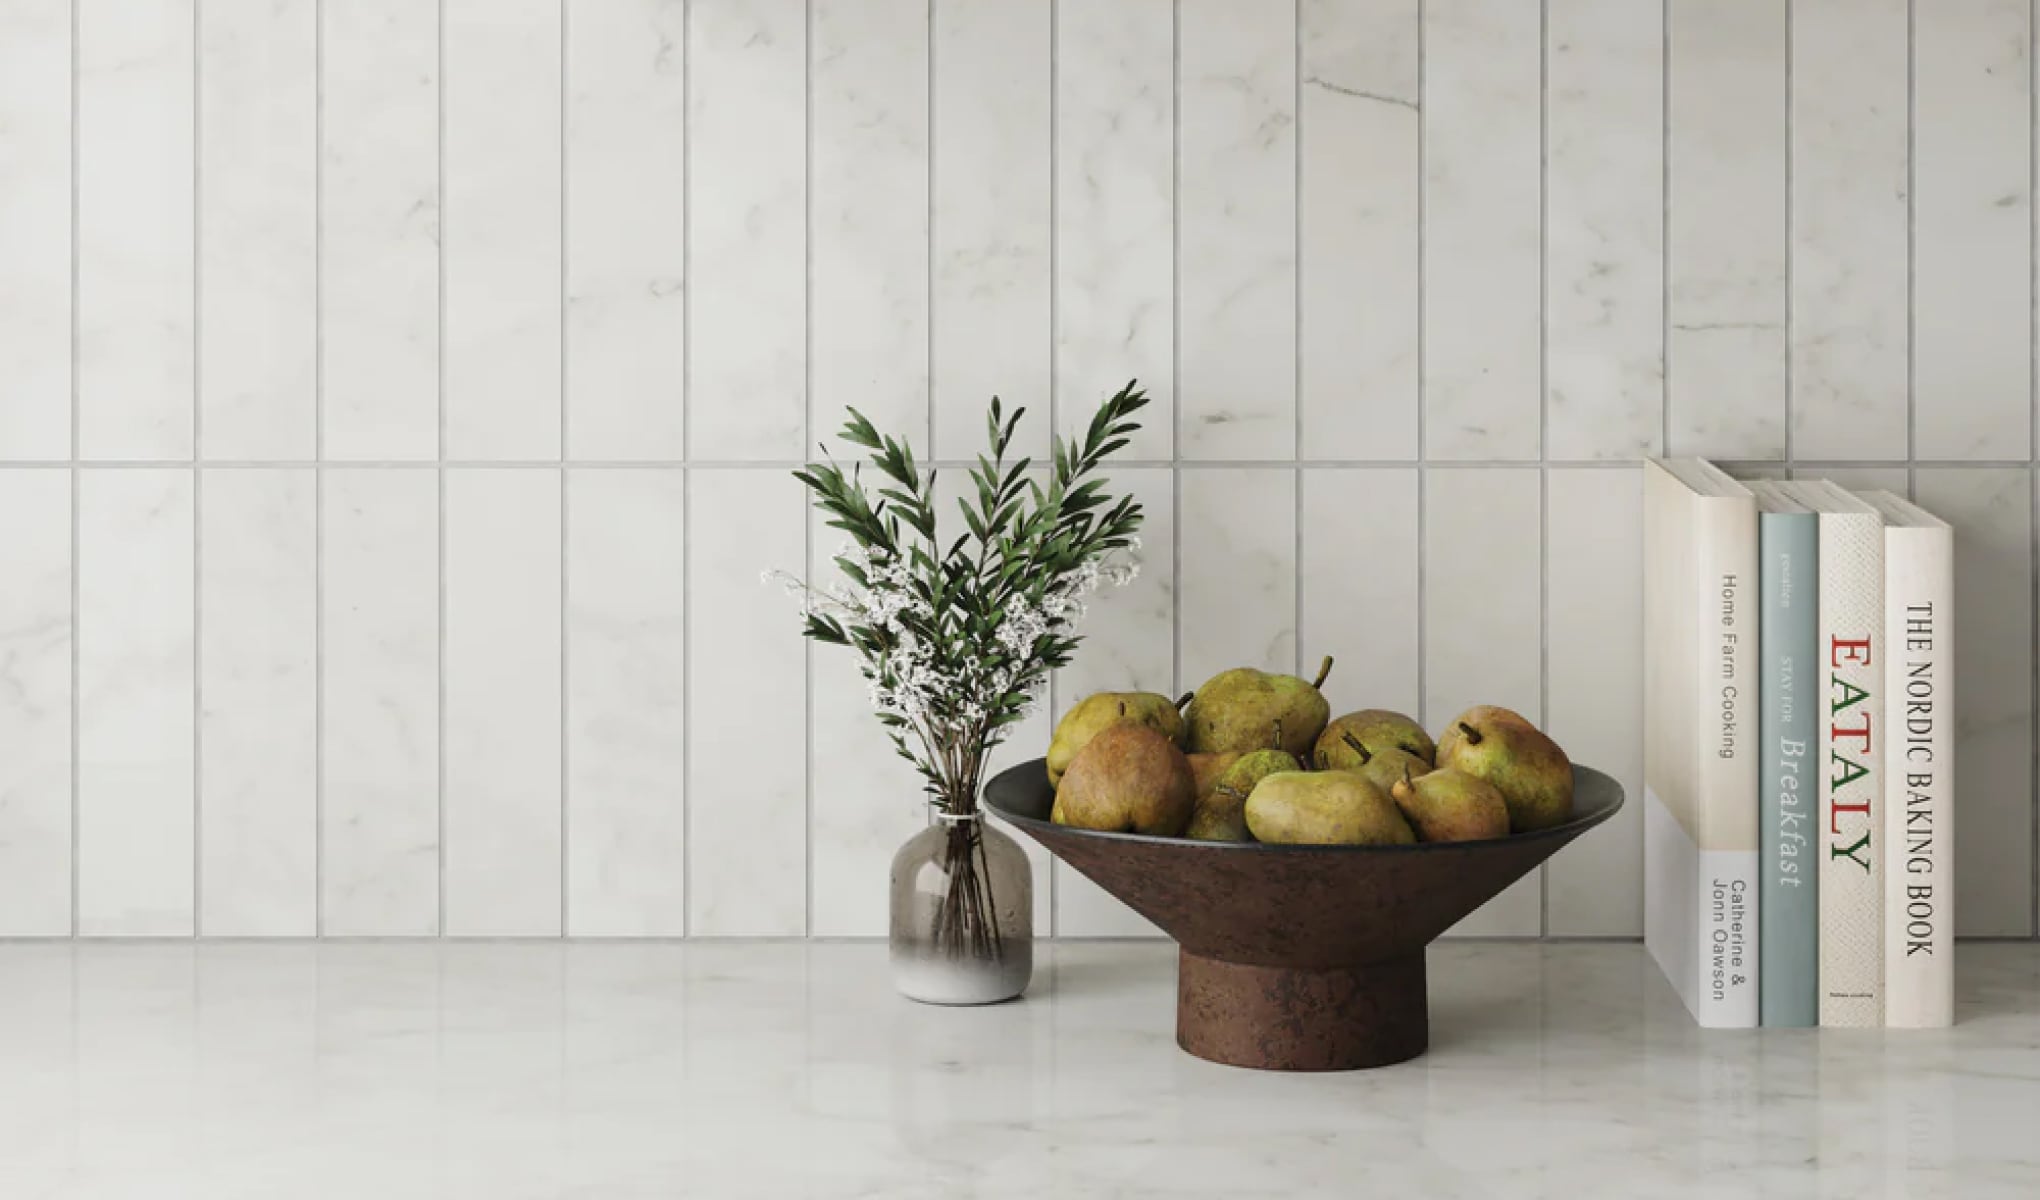 Classic White Subway Tiles in a kitchen, showcasing timeless beauty and simplicity for a sophisticated look.